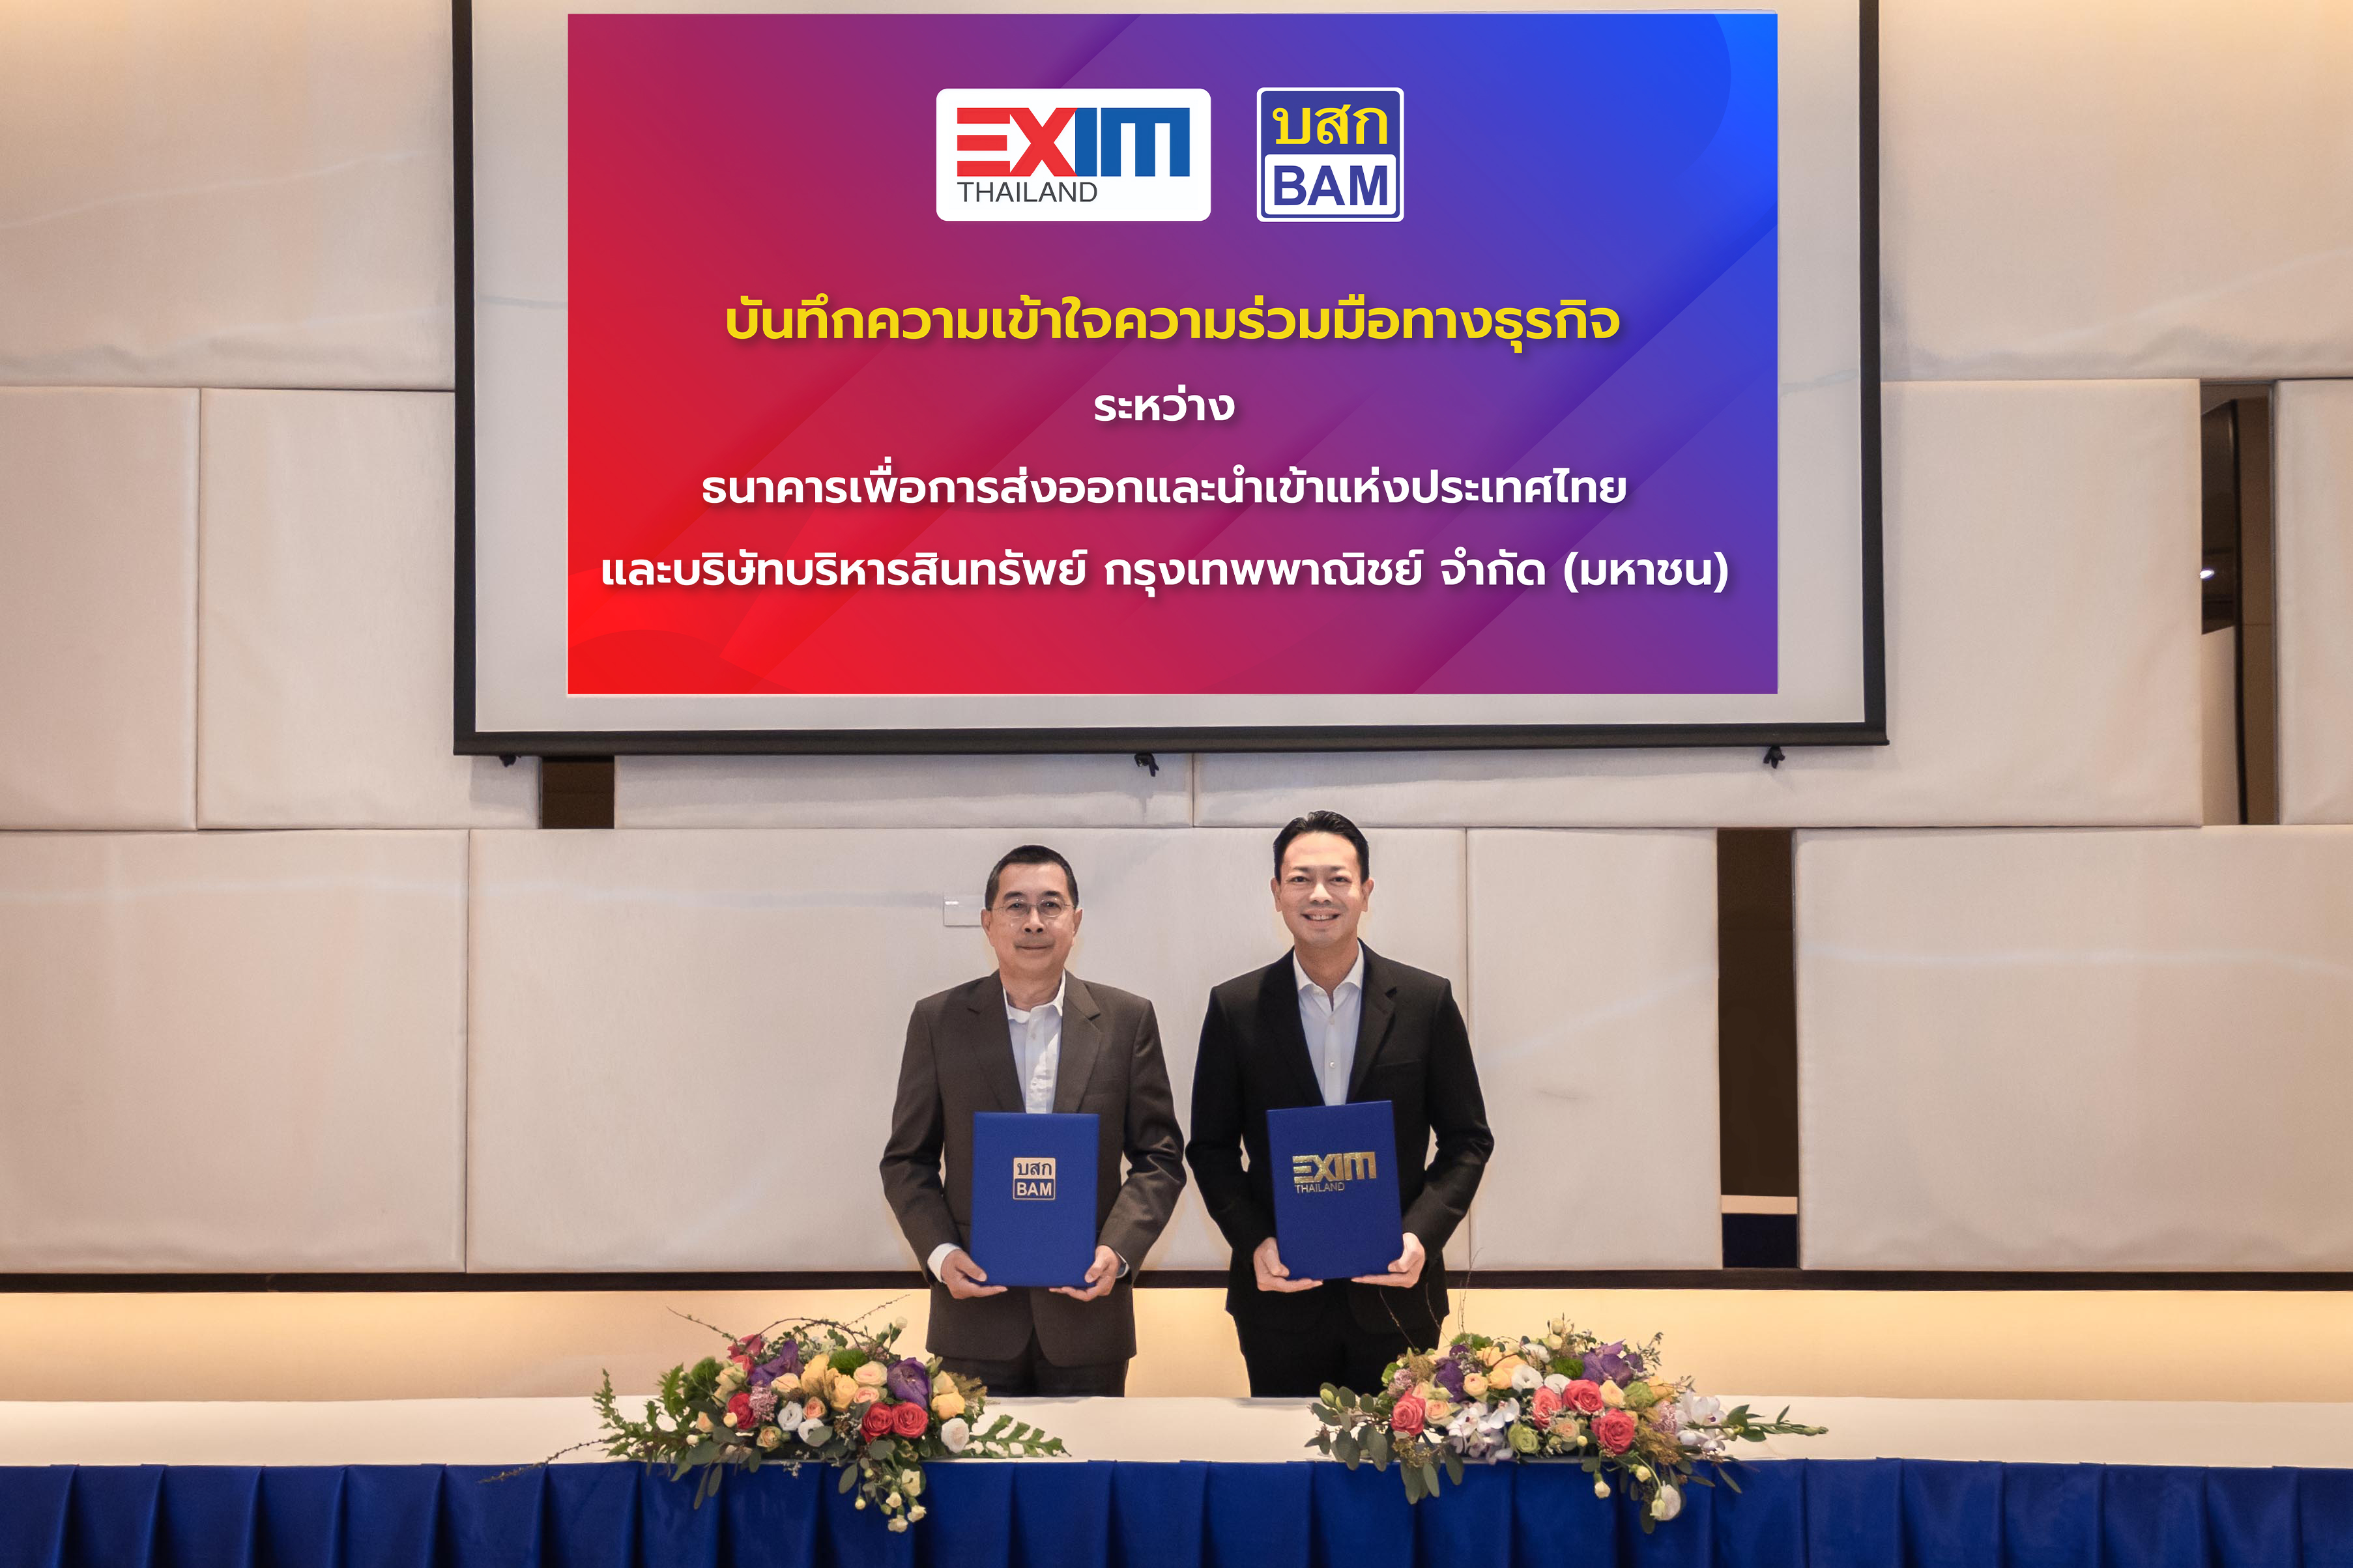 EXIM Thailand Joins Hands with BAM in Proactive Move  to Uplift Non-performing Assets Management